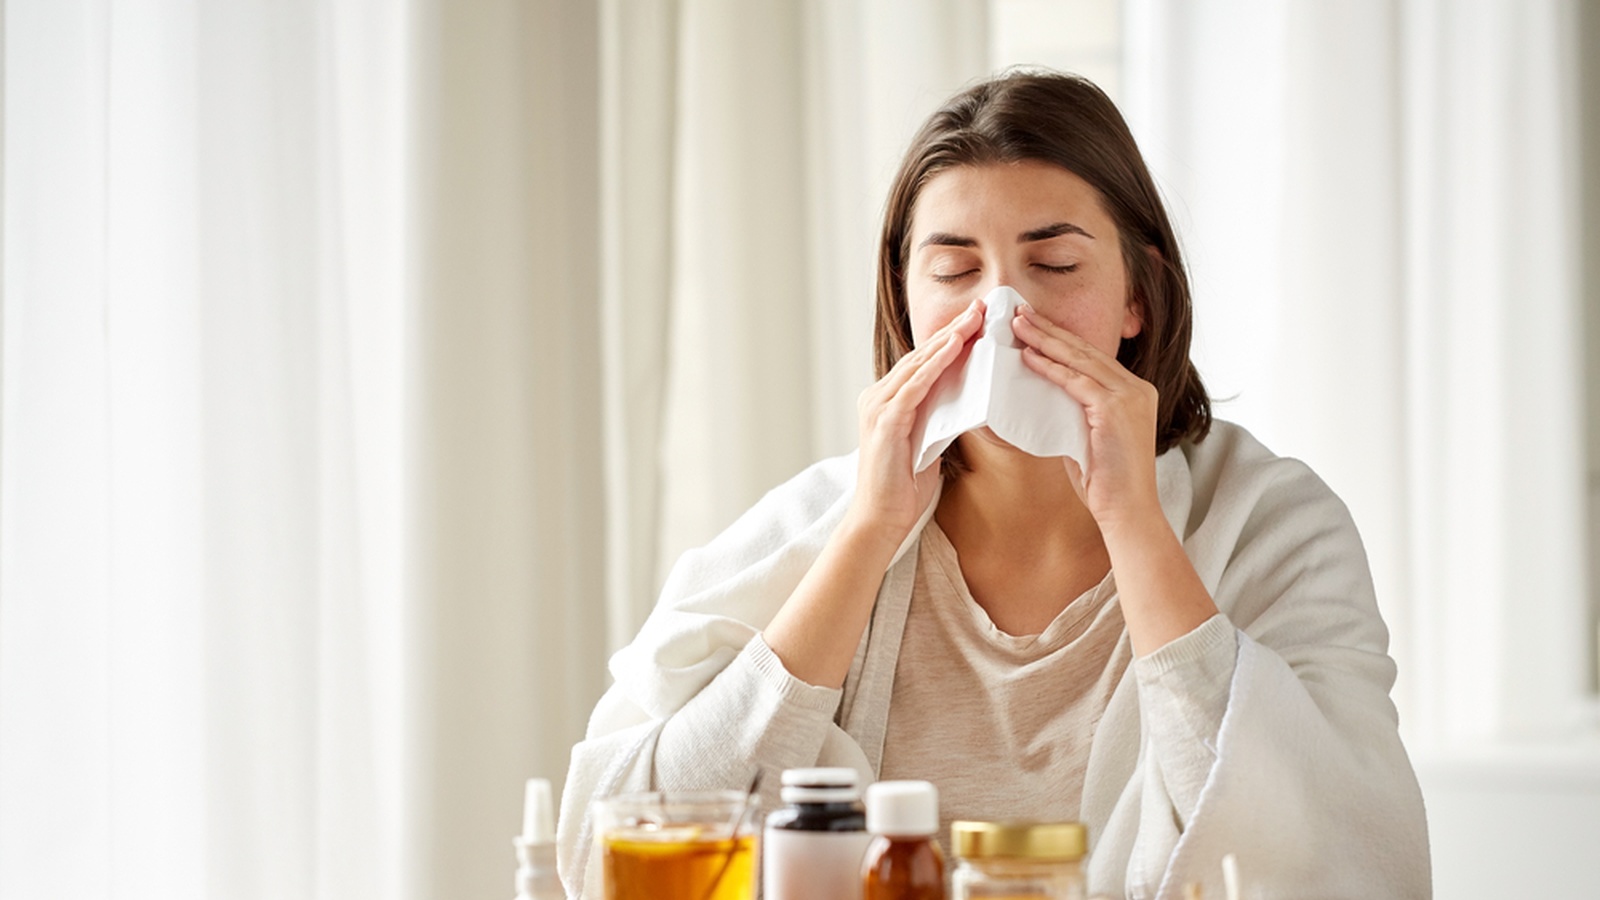 How To Protect Yourself From The Flu This Year